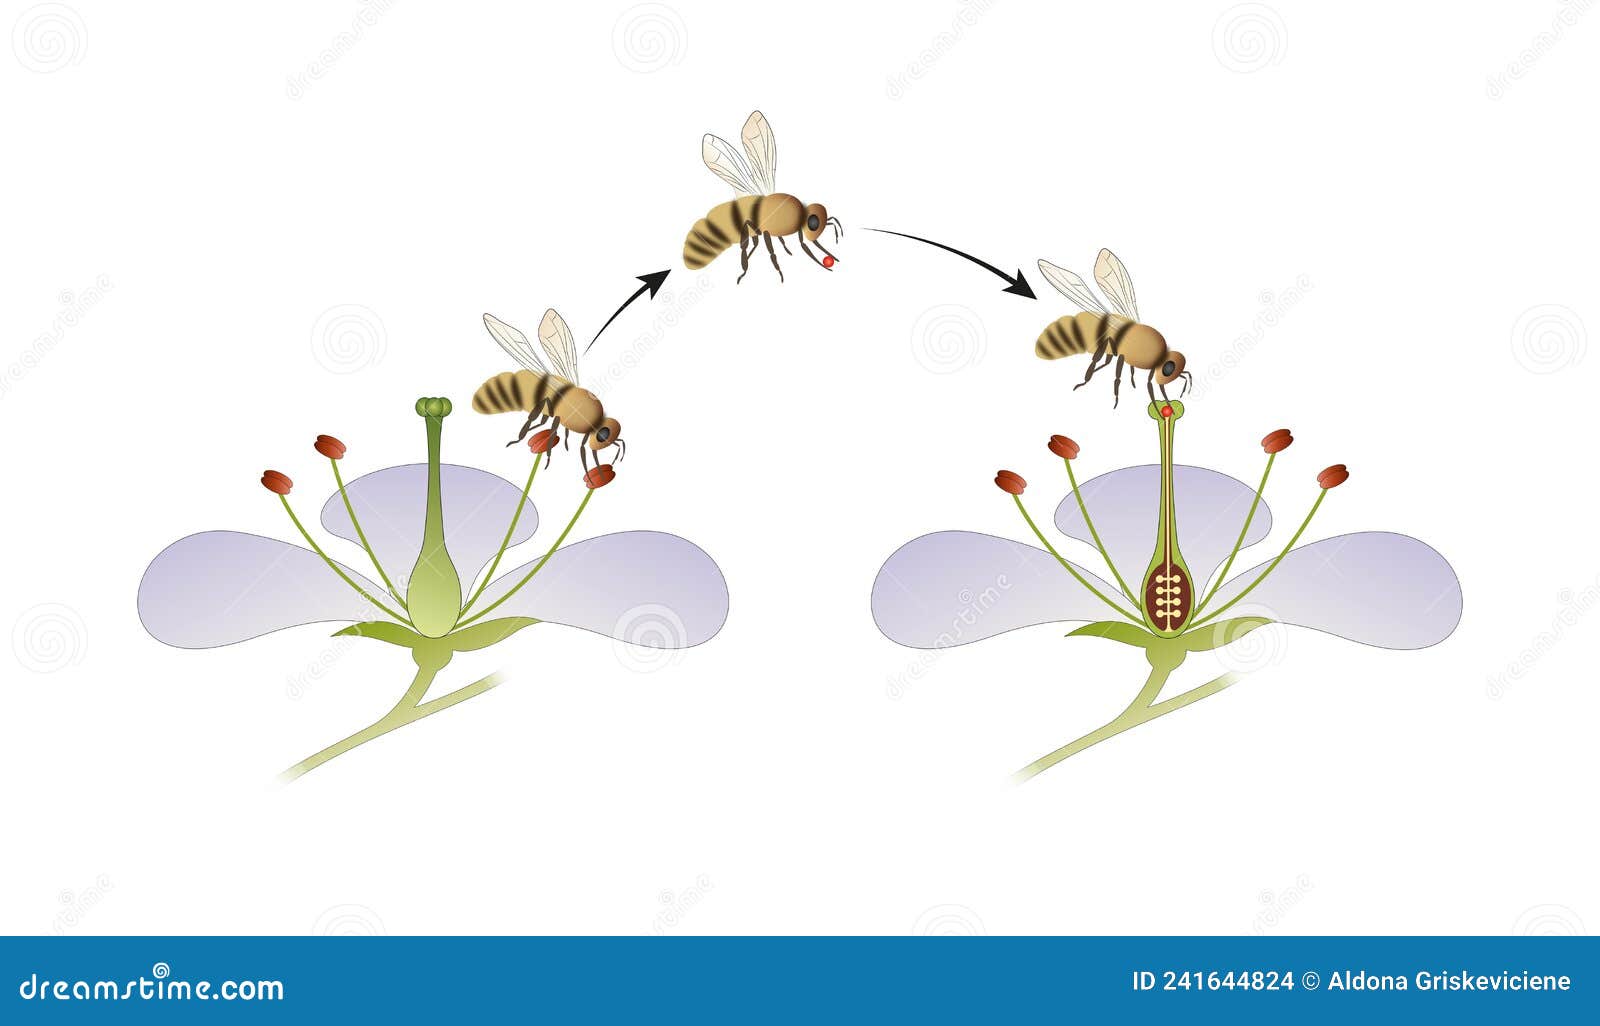 diagram of flower pollination by an insect